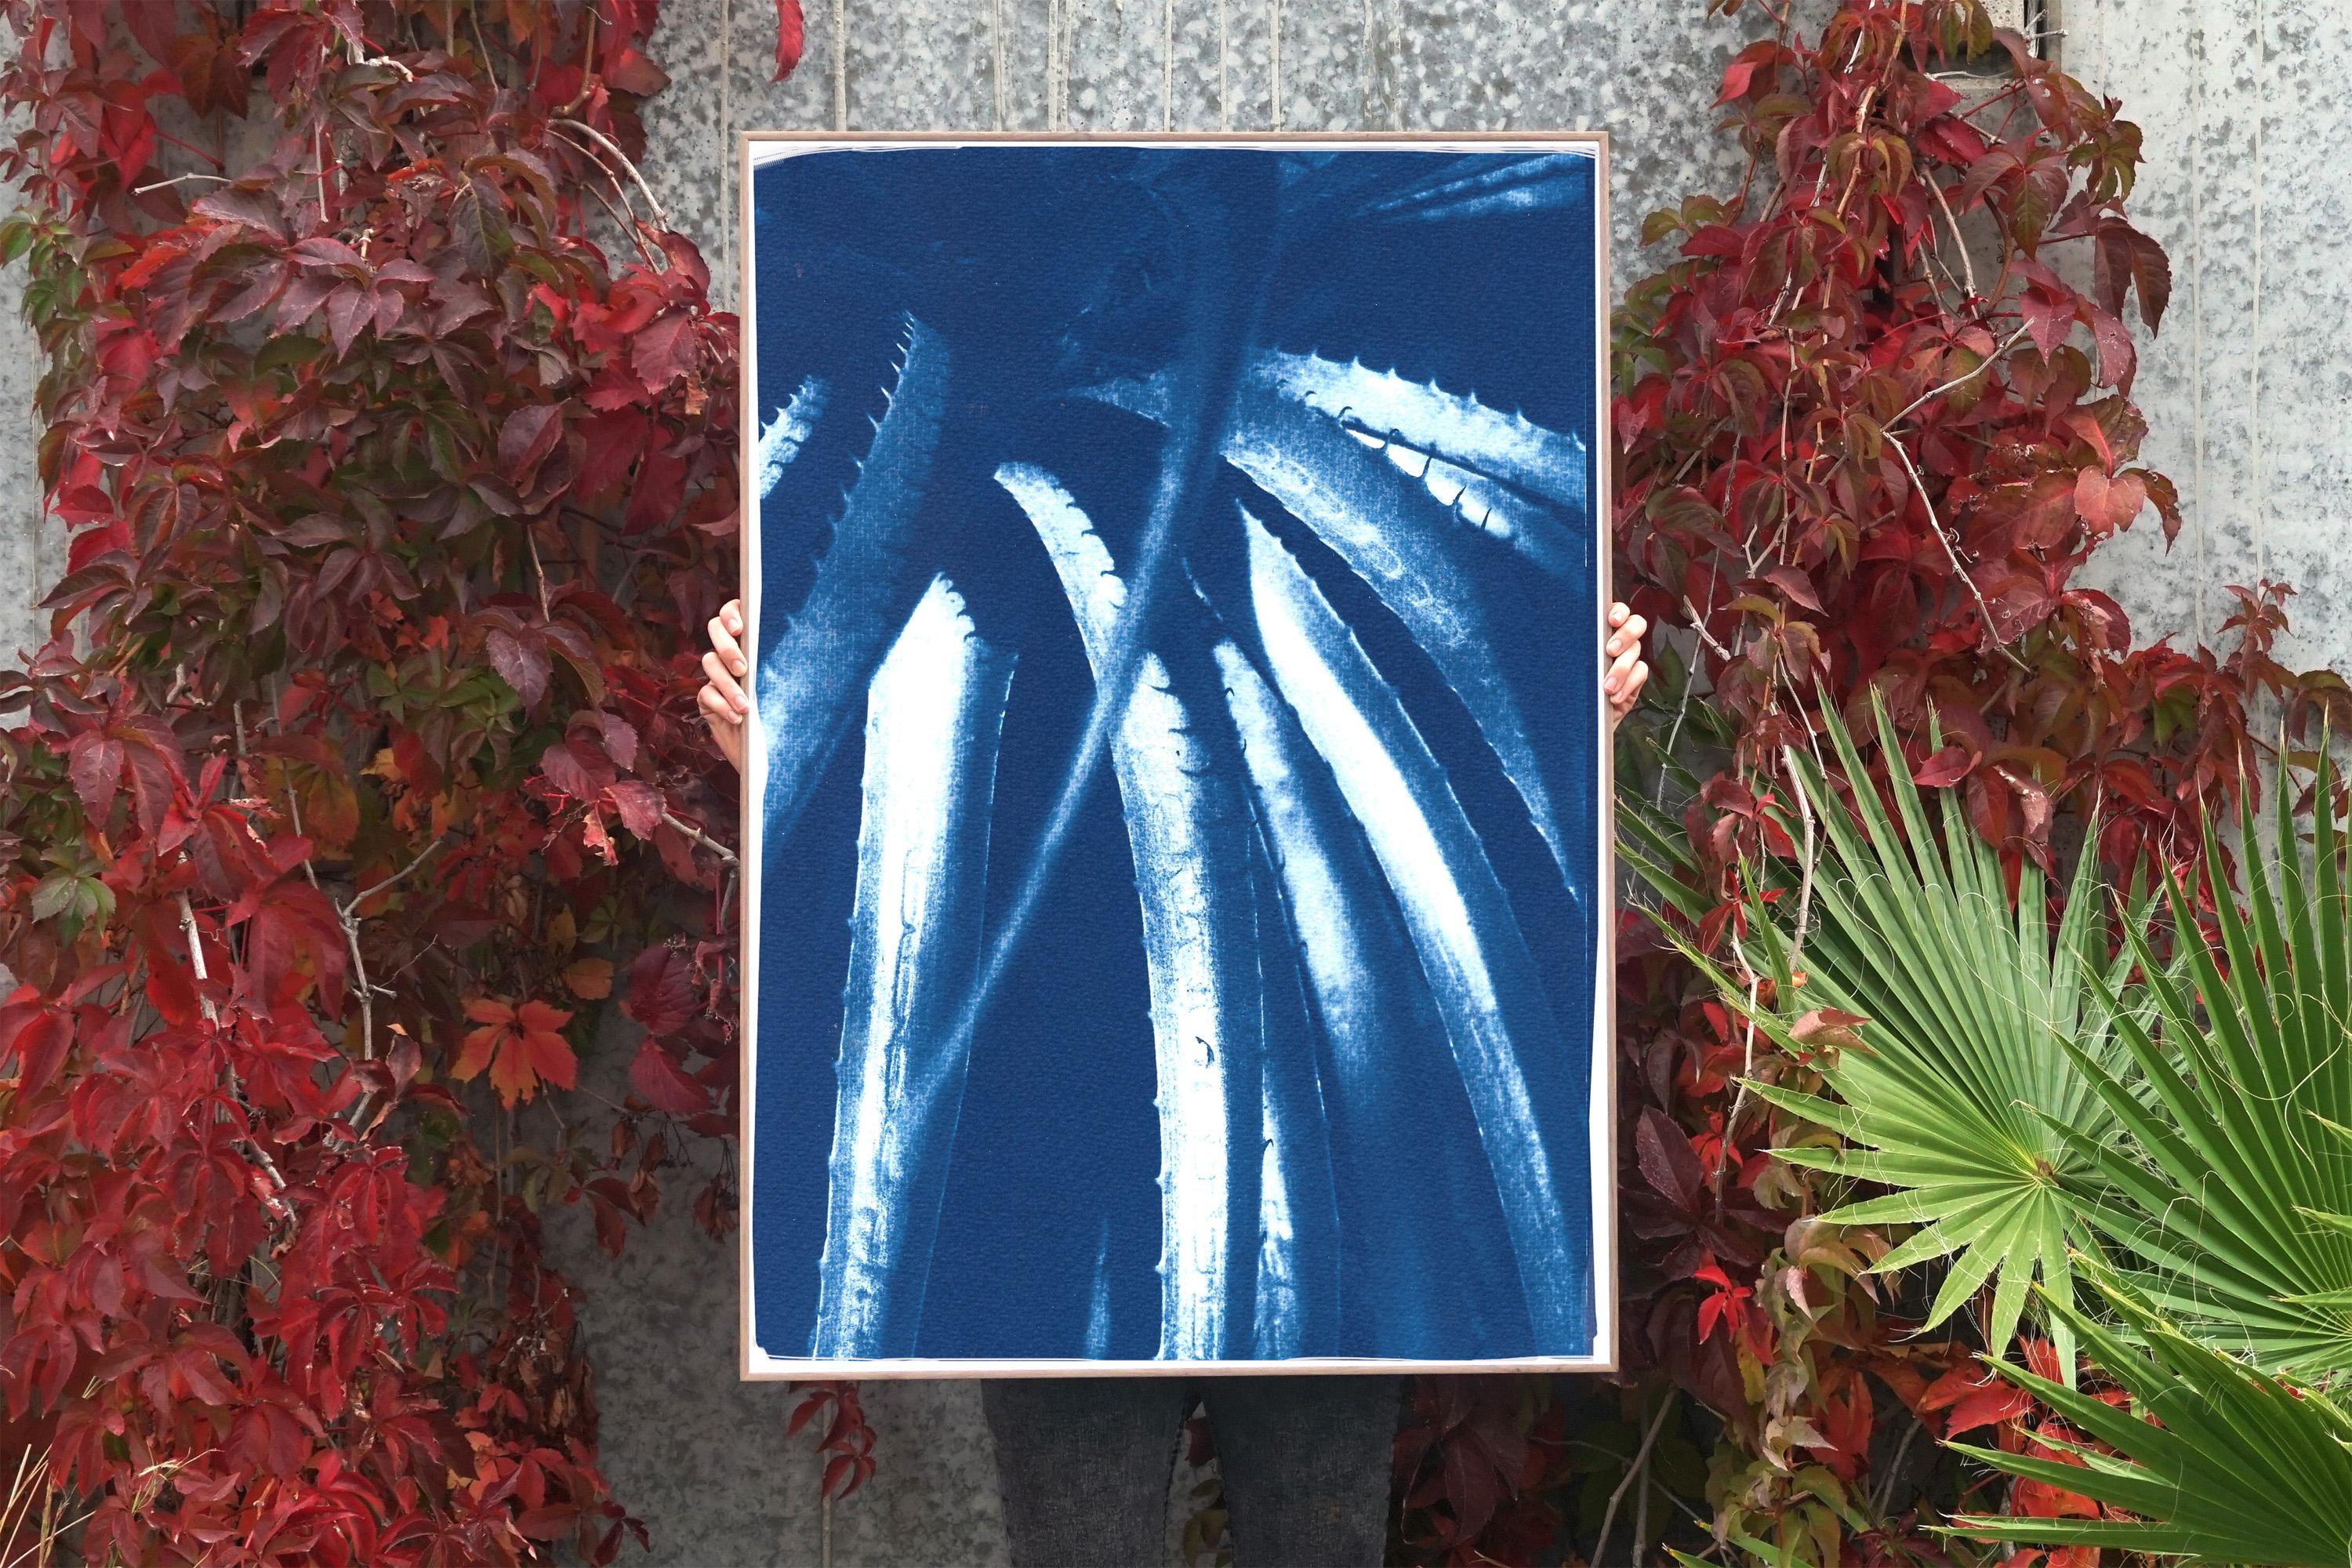 Jurassic Aloe Leaves, Botanical Cyanotype on Paper, Blue Plants, Nature Details - Naturalistic Art by Kind of Cyan